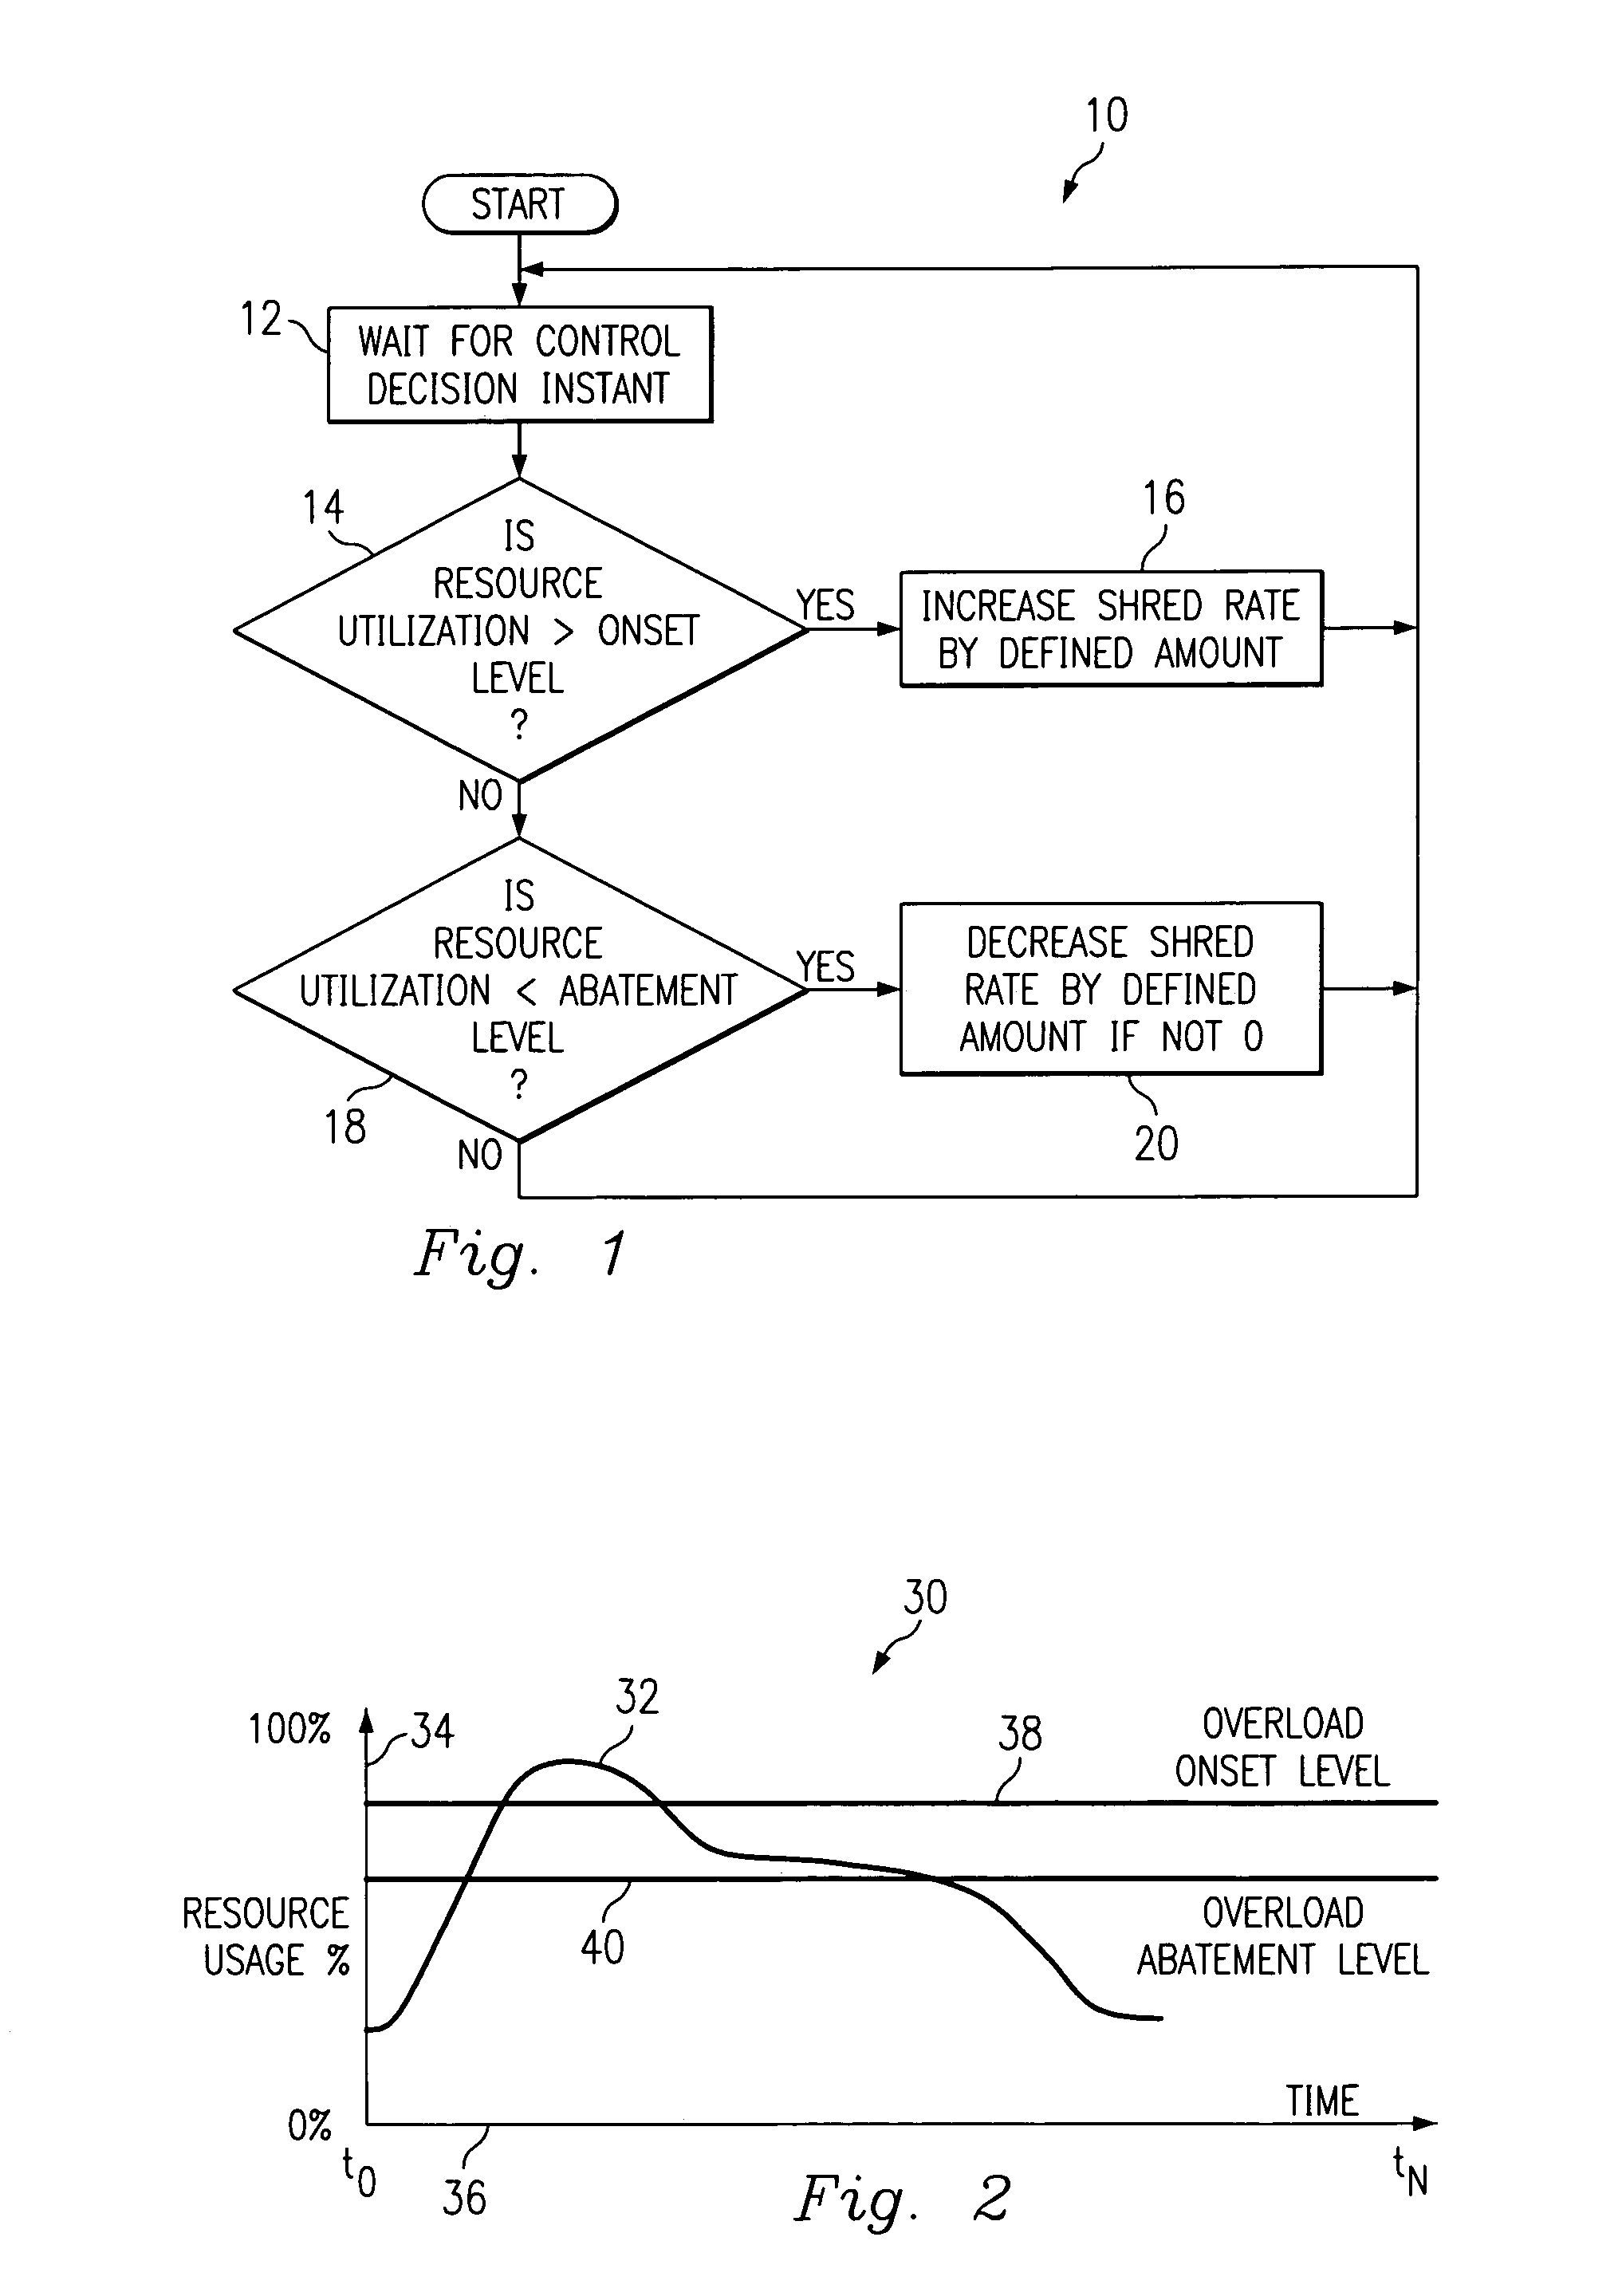 Adaptive cell gapping overload control system and method for a telecommunications system